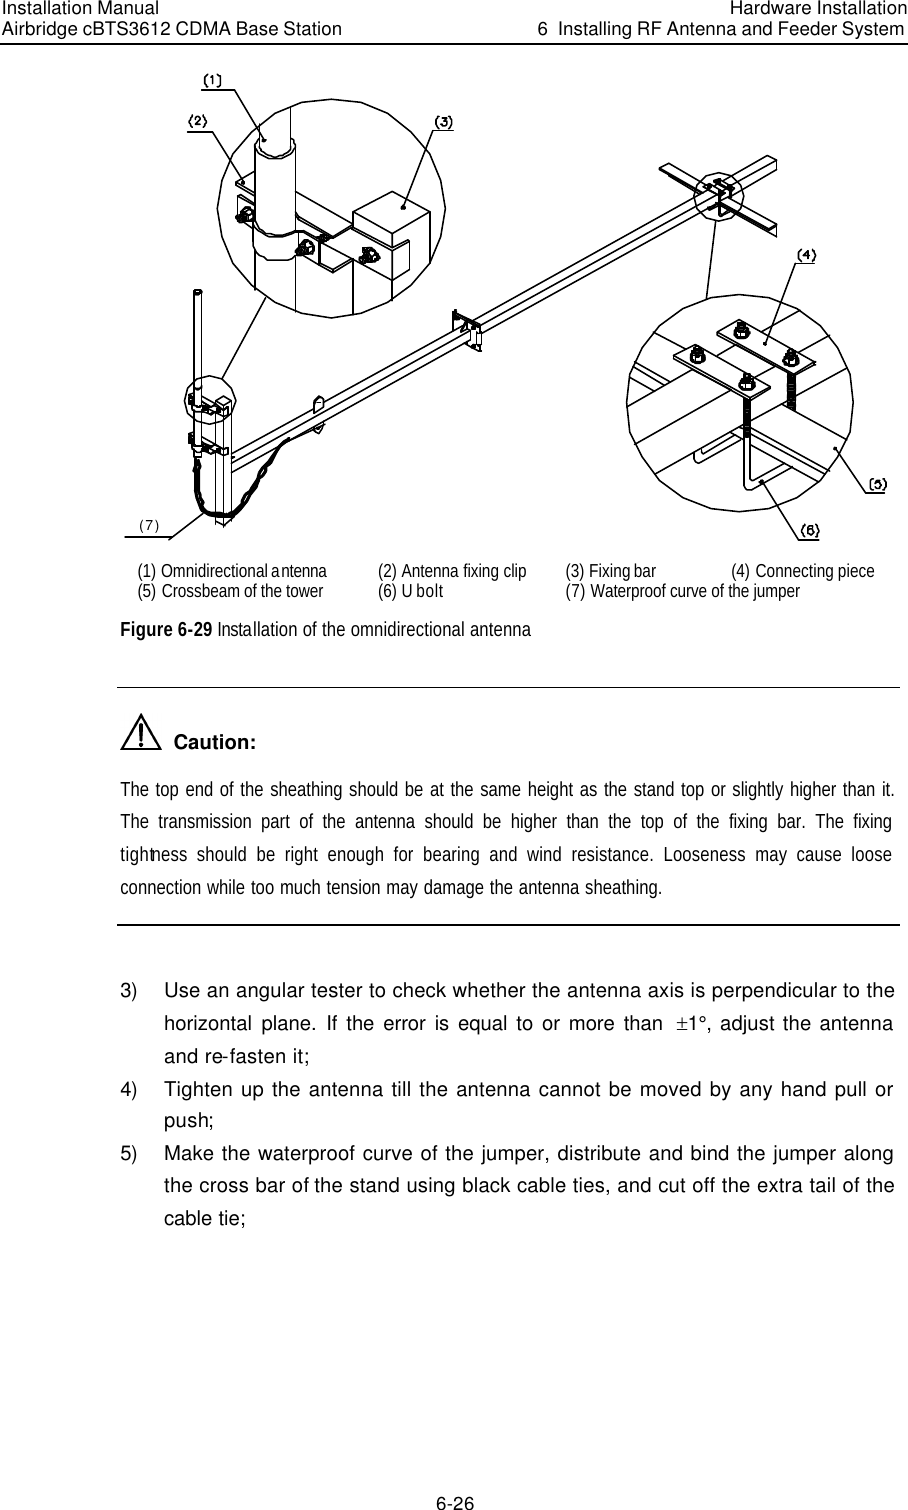 Installation Manual Airbridge cBTS3612 CDMA Base Station Hardware Installation6  Installing RF Antenna and Feeder System 6-26 (7)  (1) Omnidirectional antenna (2) Antenna fixing clip (3) Fixing bar (4) Connecting piece (5) Crossbeam of the tower (6) U bolt (7) Waterproof curve of the jumper Figure 6-29 Installation of the omnidirectional antenna   Caution: The top end of the sheathing should be at the same height as the stand top or slightly higher than it. The transmission part of the antenna should be higher than the top of the fixing bar. The fixing tightness should be right enough for bearing and wind resistance. Looseness may cause loose connection while too much tension may damage the antenna sheathing.  3) Use an angular tester to check whether the antenna axis is perpendicular to the horizontal plane. If the error is equal to or more than  !1°, adjust the antenna and re-fasten it;  4) Tighten up the antenna till the antenna cannot be moved by any hand pull or push;  5) Make the waterproof curve of the jumper, distribute and bind the jumper along the cross bar of the stand using black cable ties, and cut off the extra tail of the cable tie; 